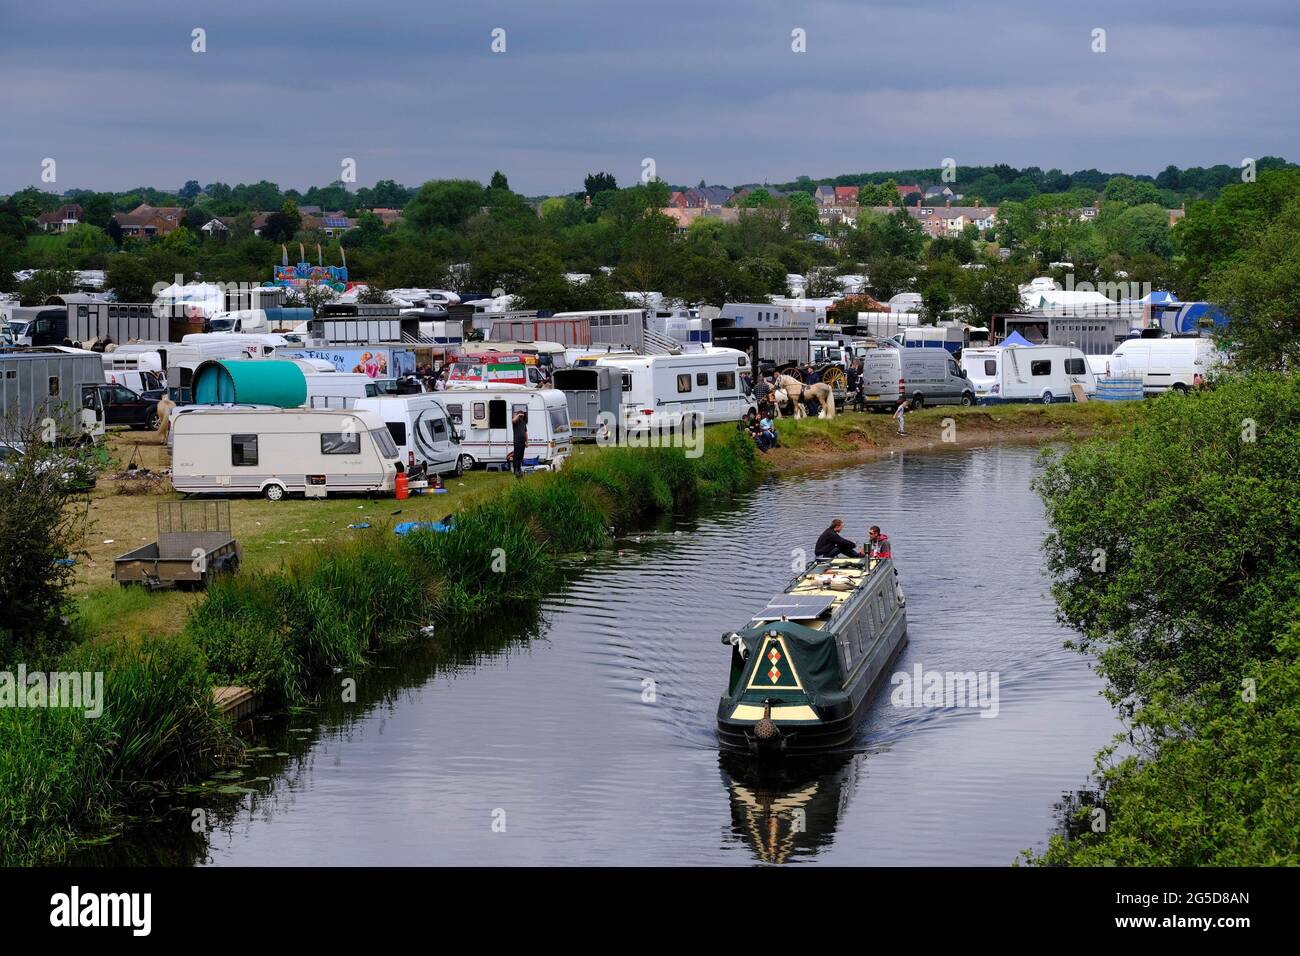 Mountsorrel, Leicestershire, UK. 26th June 2021. A narrow boat passes the Betty Hensers Horse Fair. Leicestershire Police and Charnwood Borough Council are working together to offer guidance and support to the organisers after concerns about possible breaches in Covid-19 regulations and the impact on local communities. Credit Darren Staples/Alamy Live News. Stock Photo